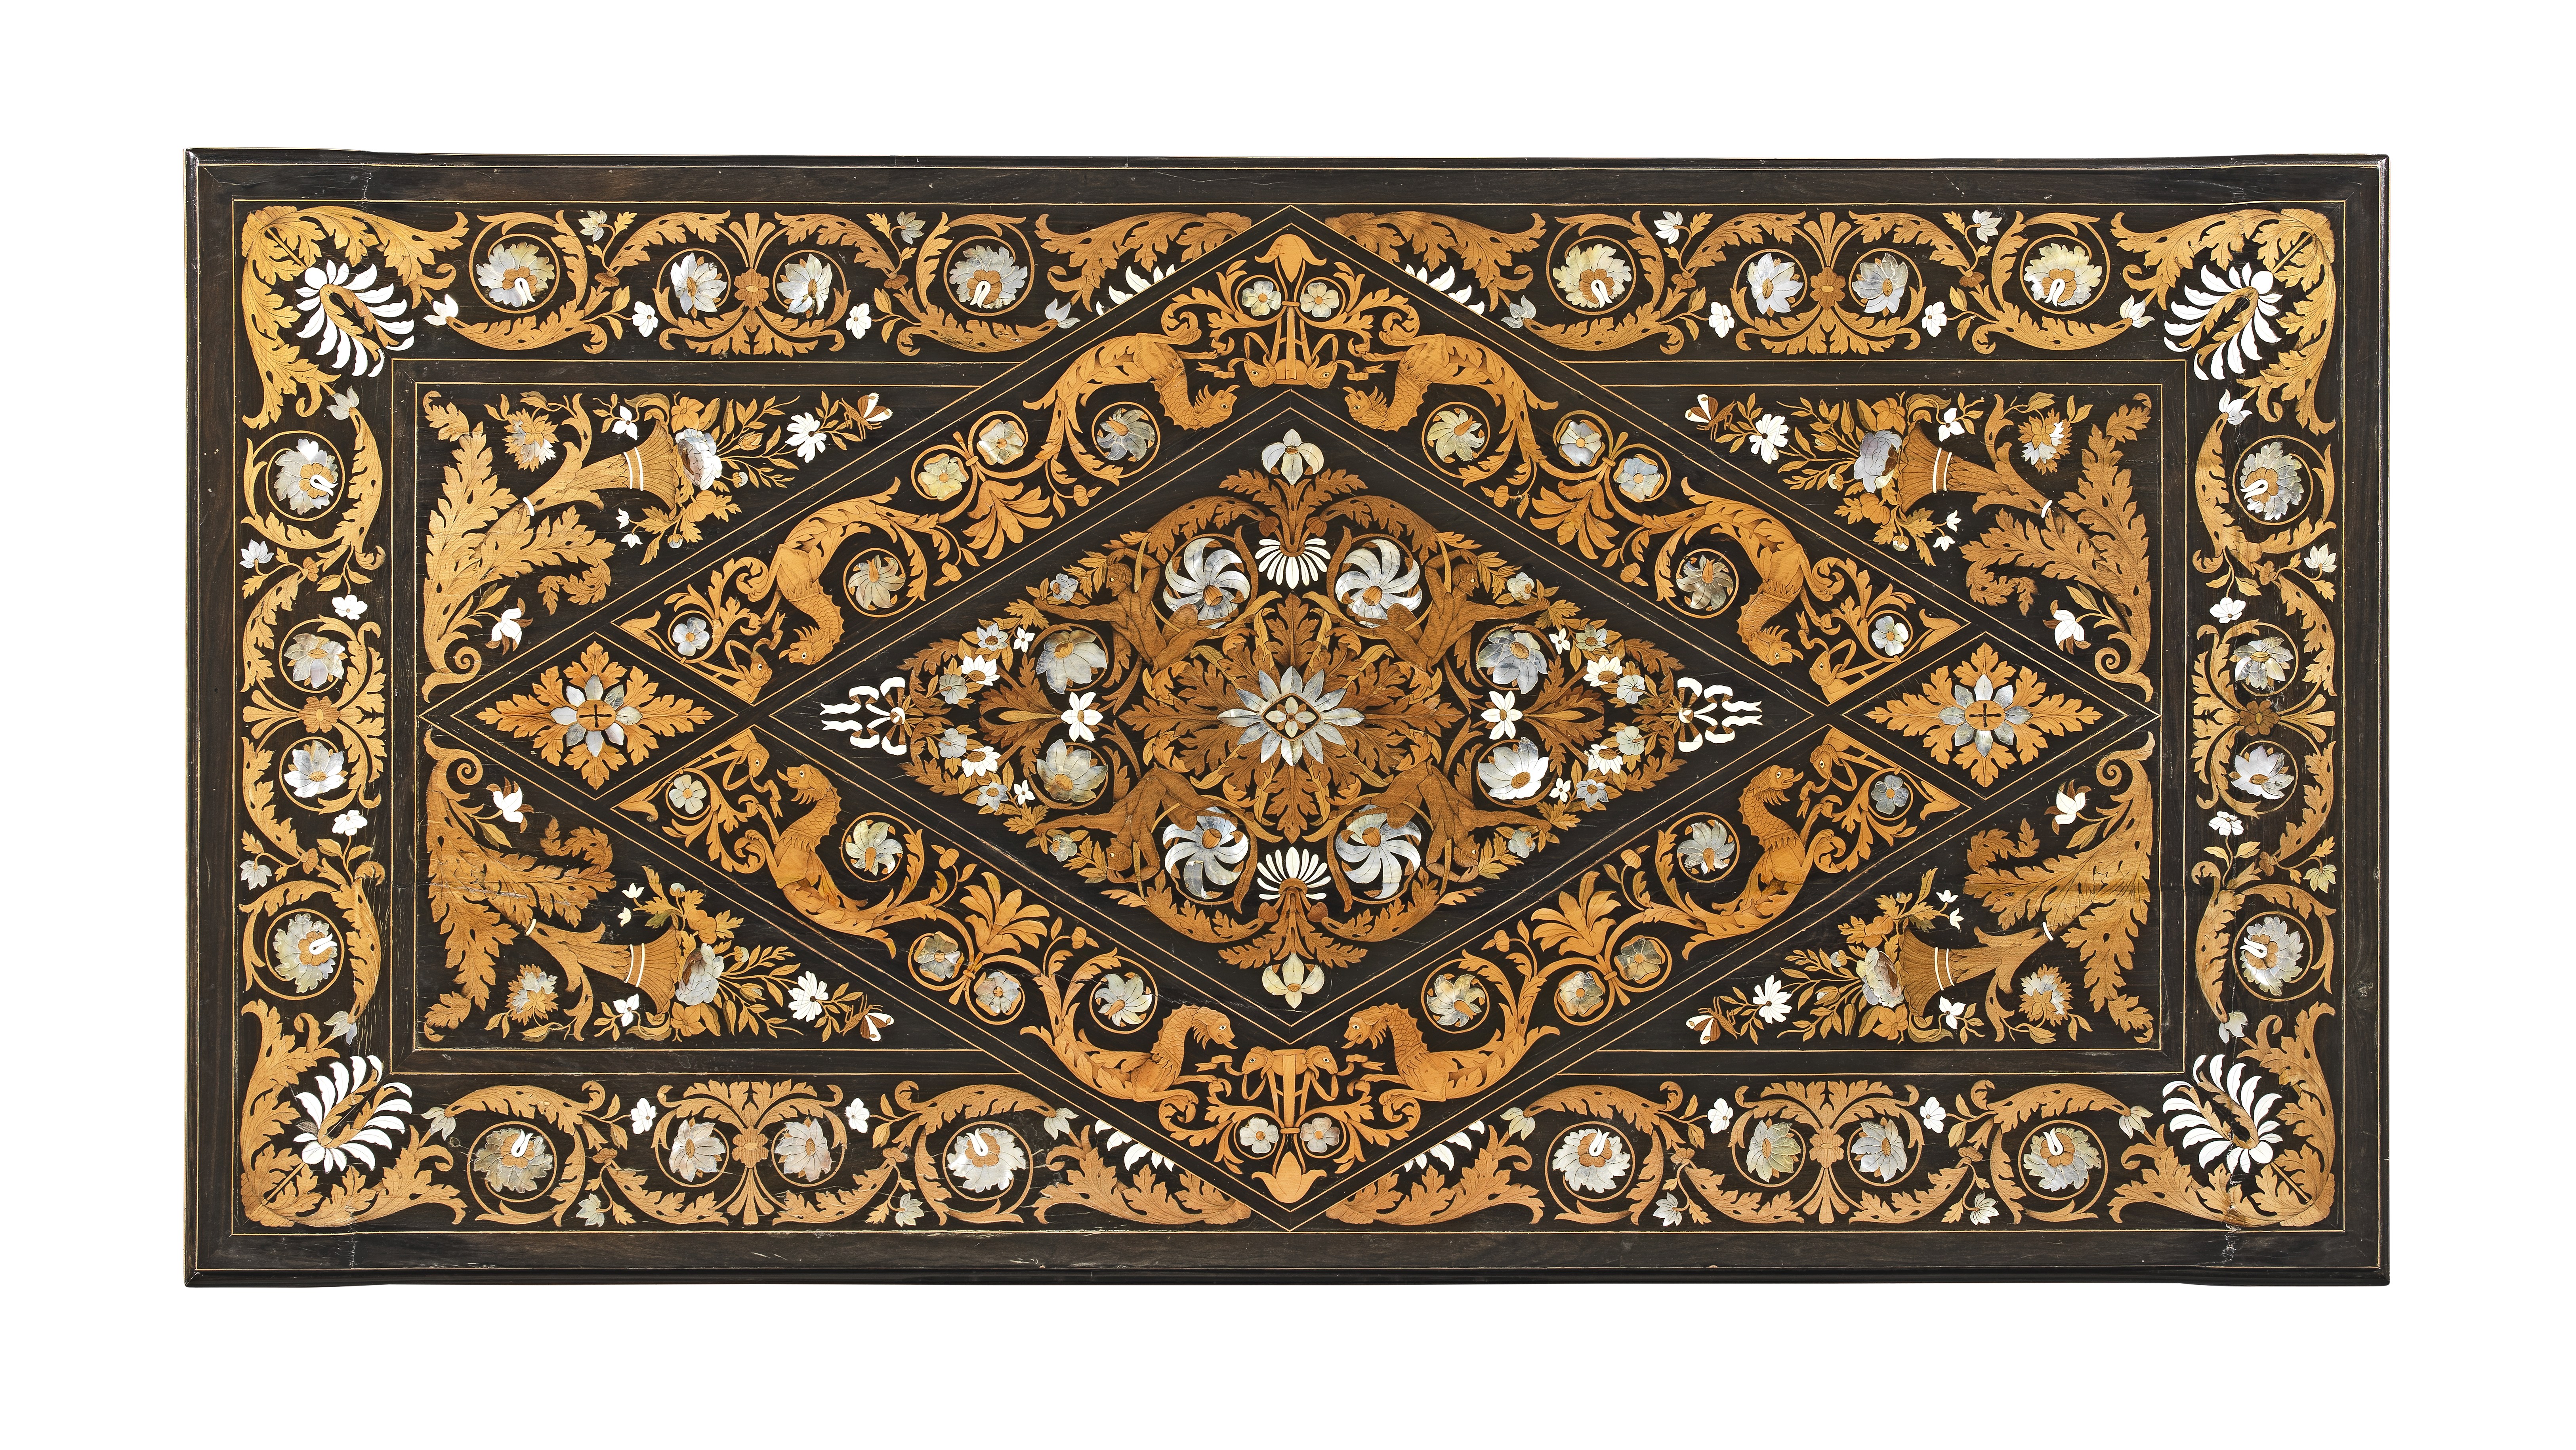 An Italian mid 19th century ebony, walnut, ivory, mother of pearl and fruitwood marquetry ebonise...